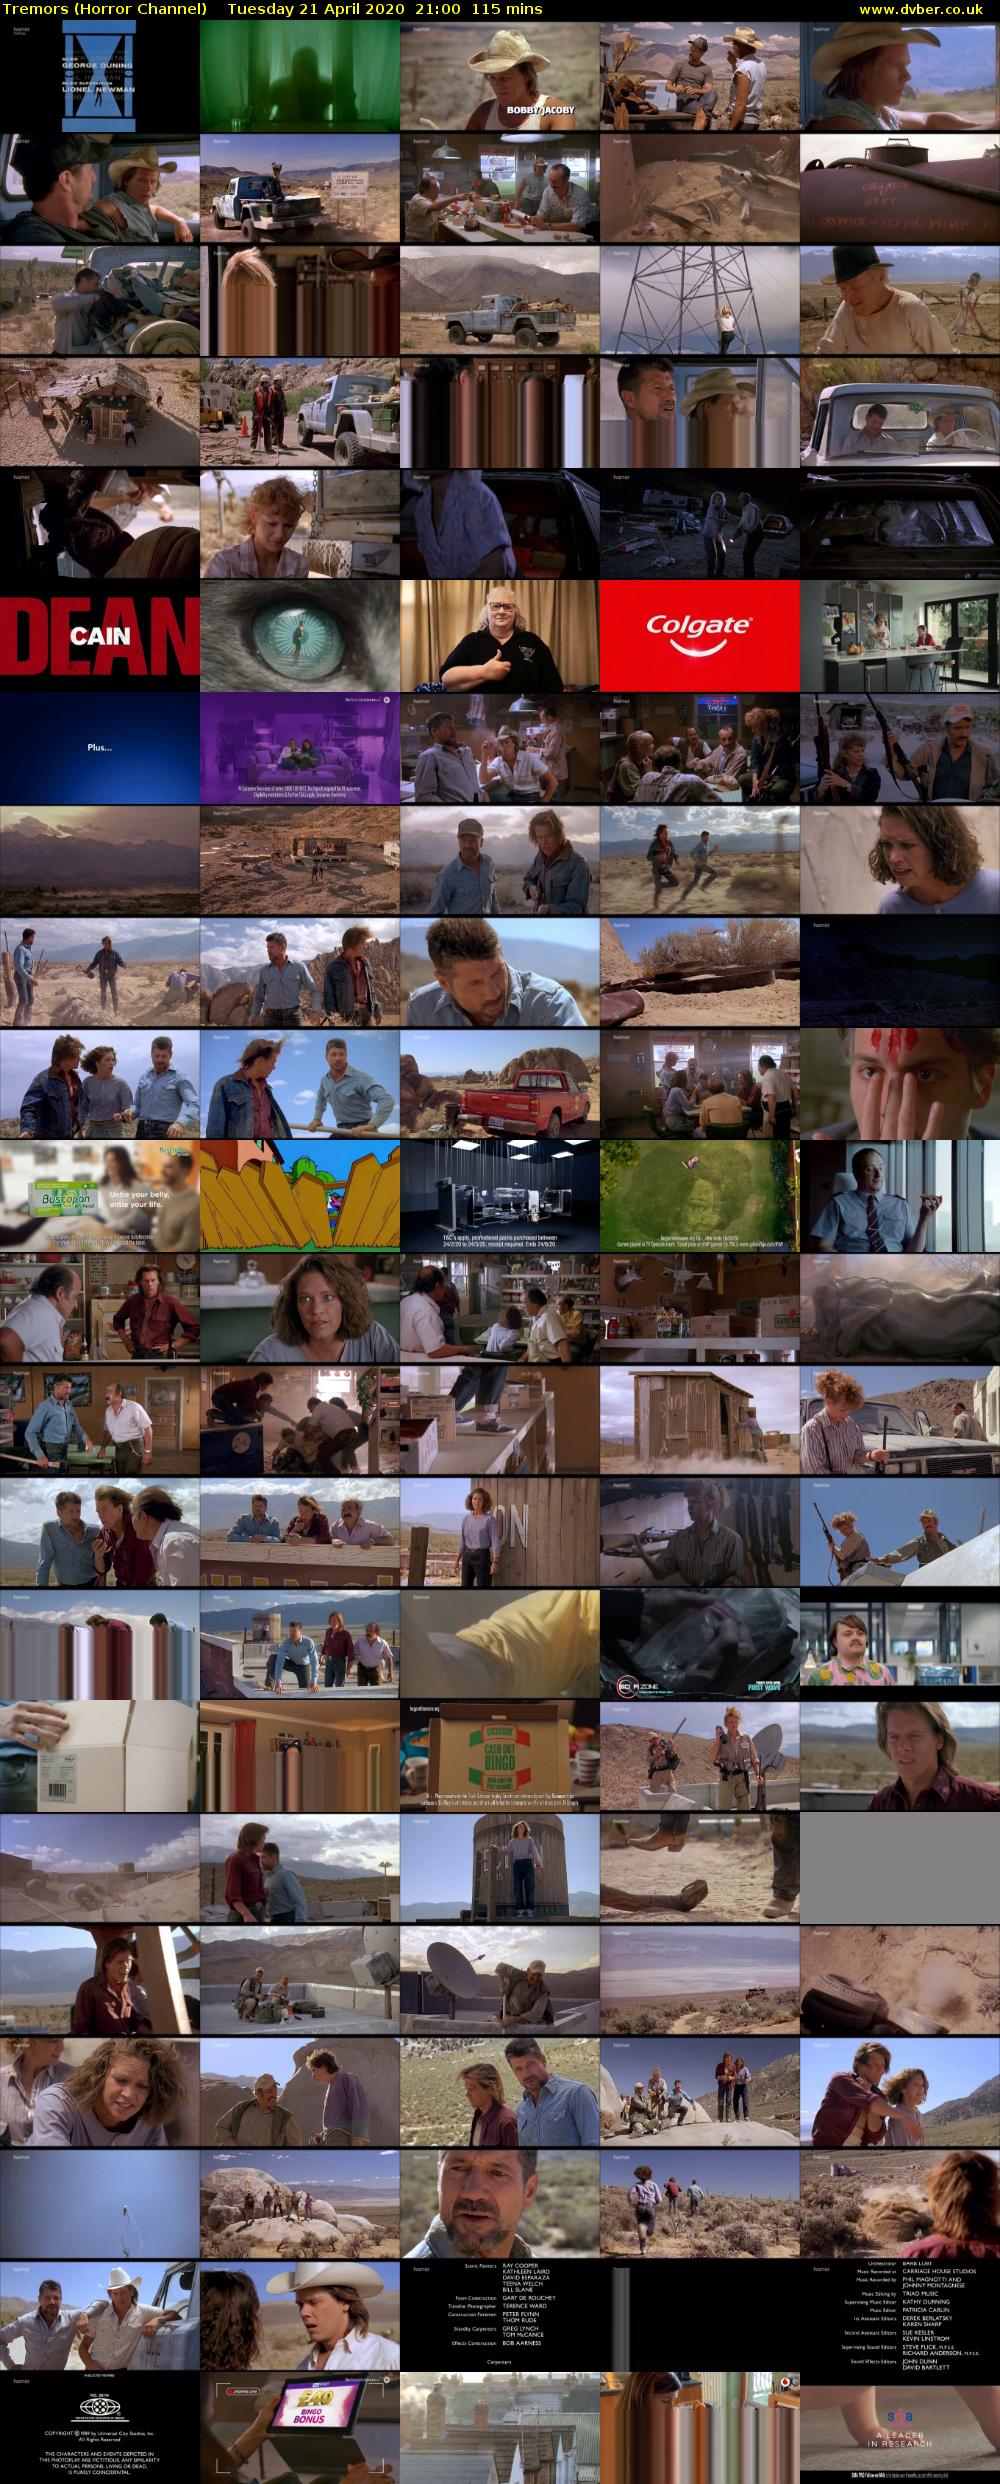 Tremors (Horror Channel) Tuesday 21 April 2020 21:00 - 22:55